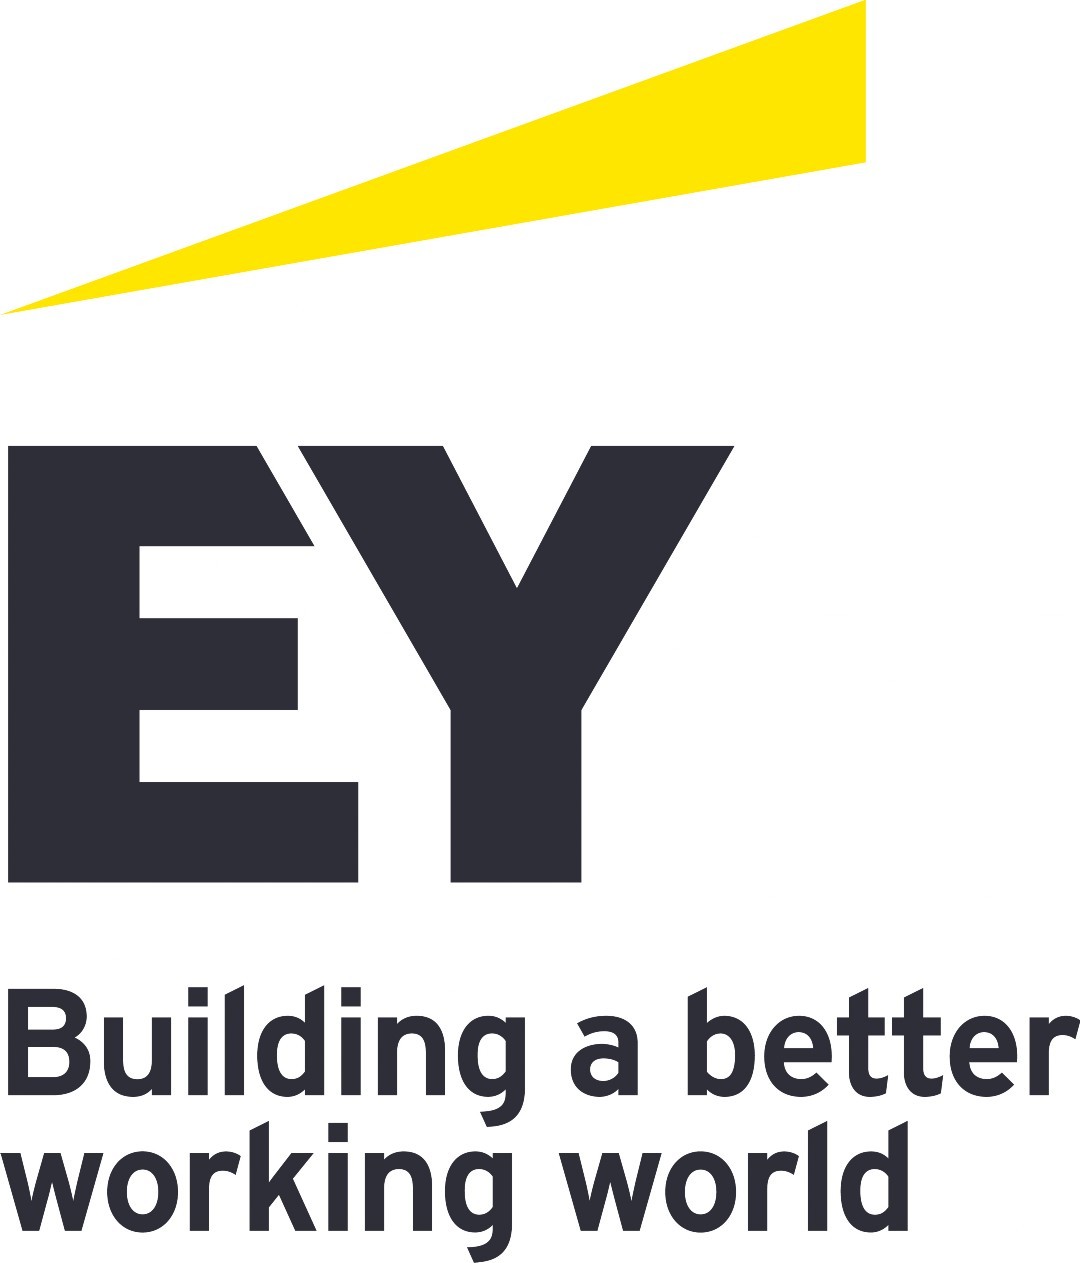 Ernst & Young AB logotyp